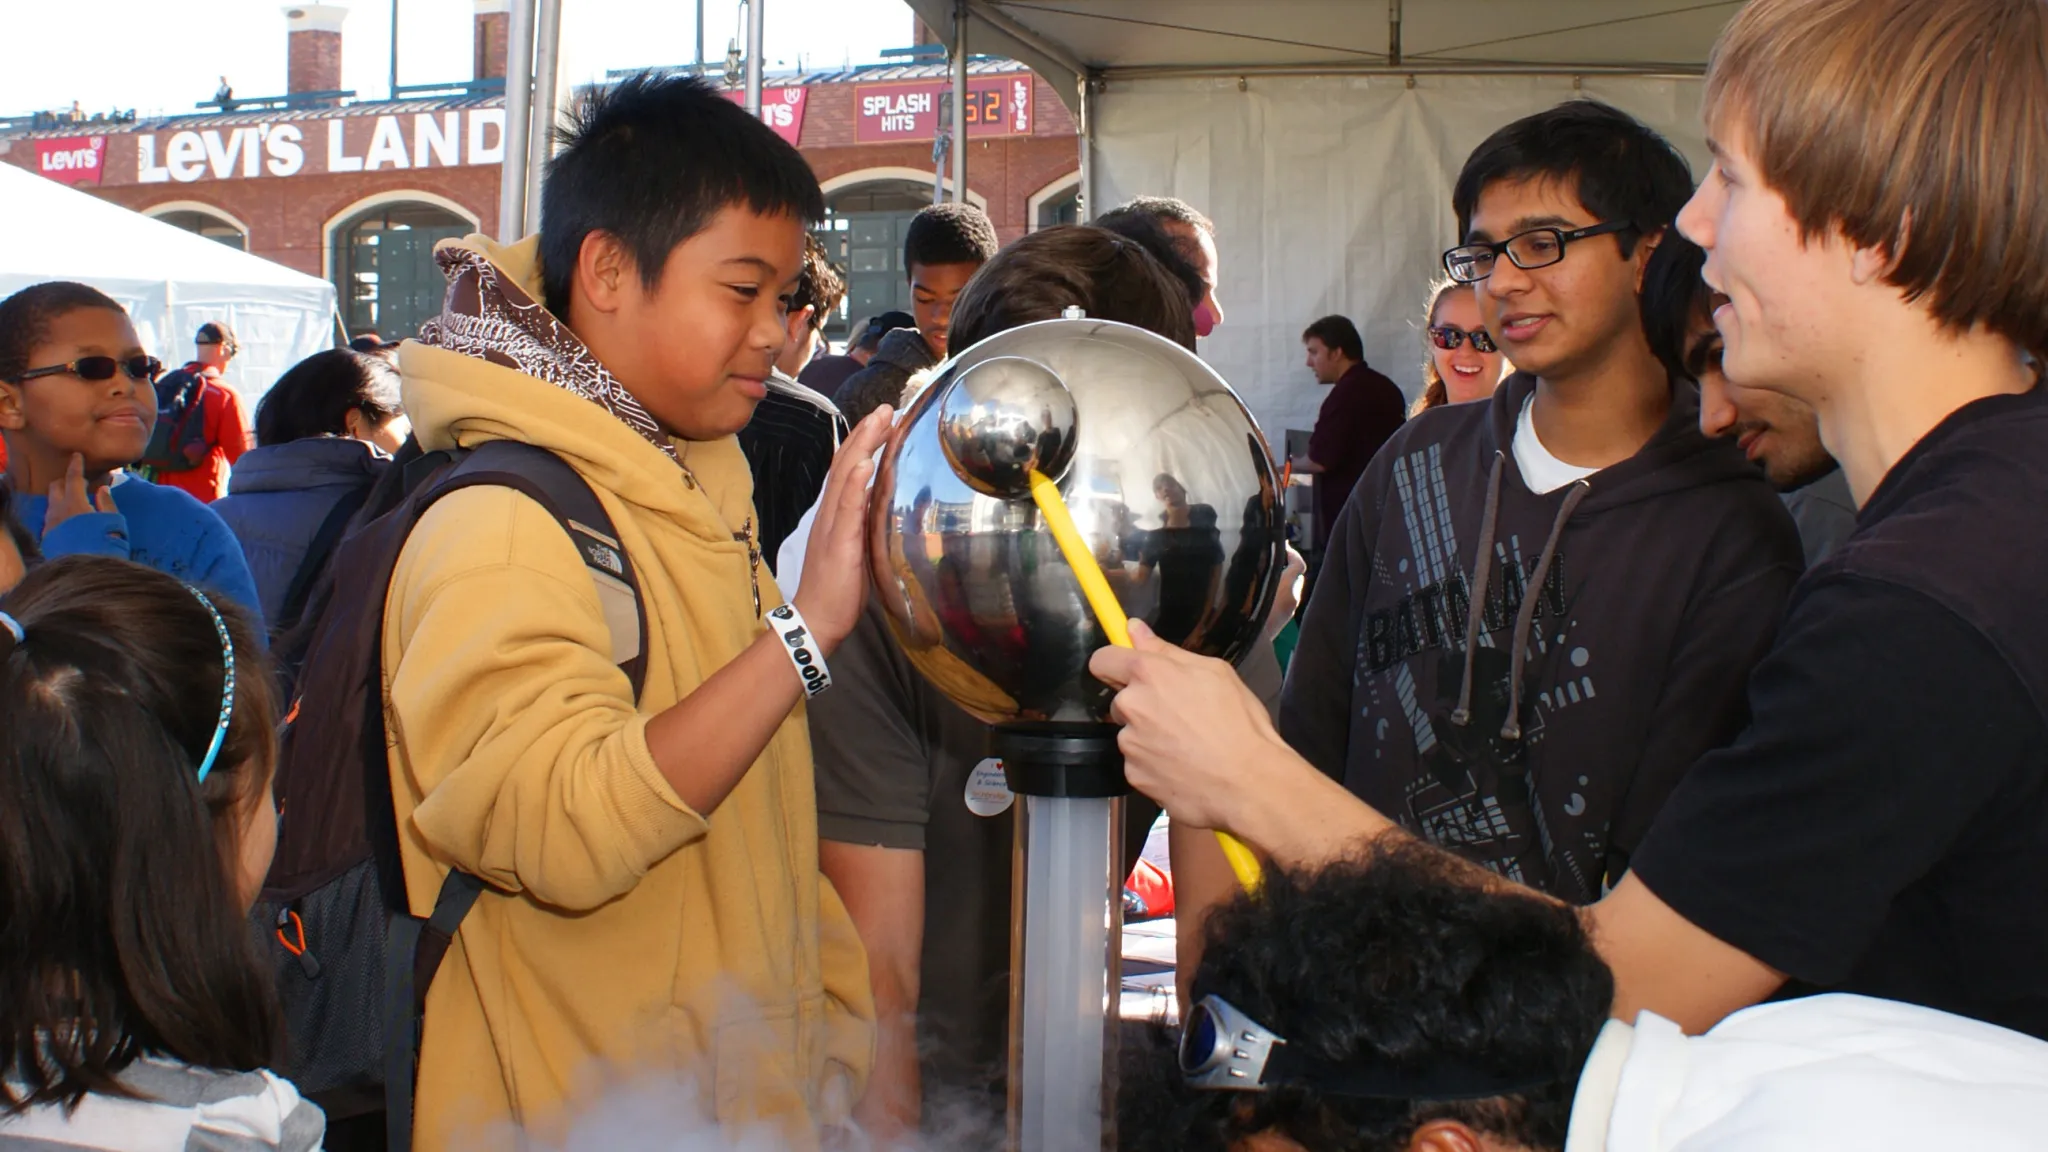 Science at Cal brings the wonders of STEM research at UC Berkeley to the community!